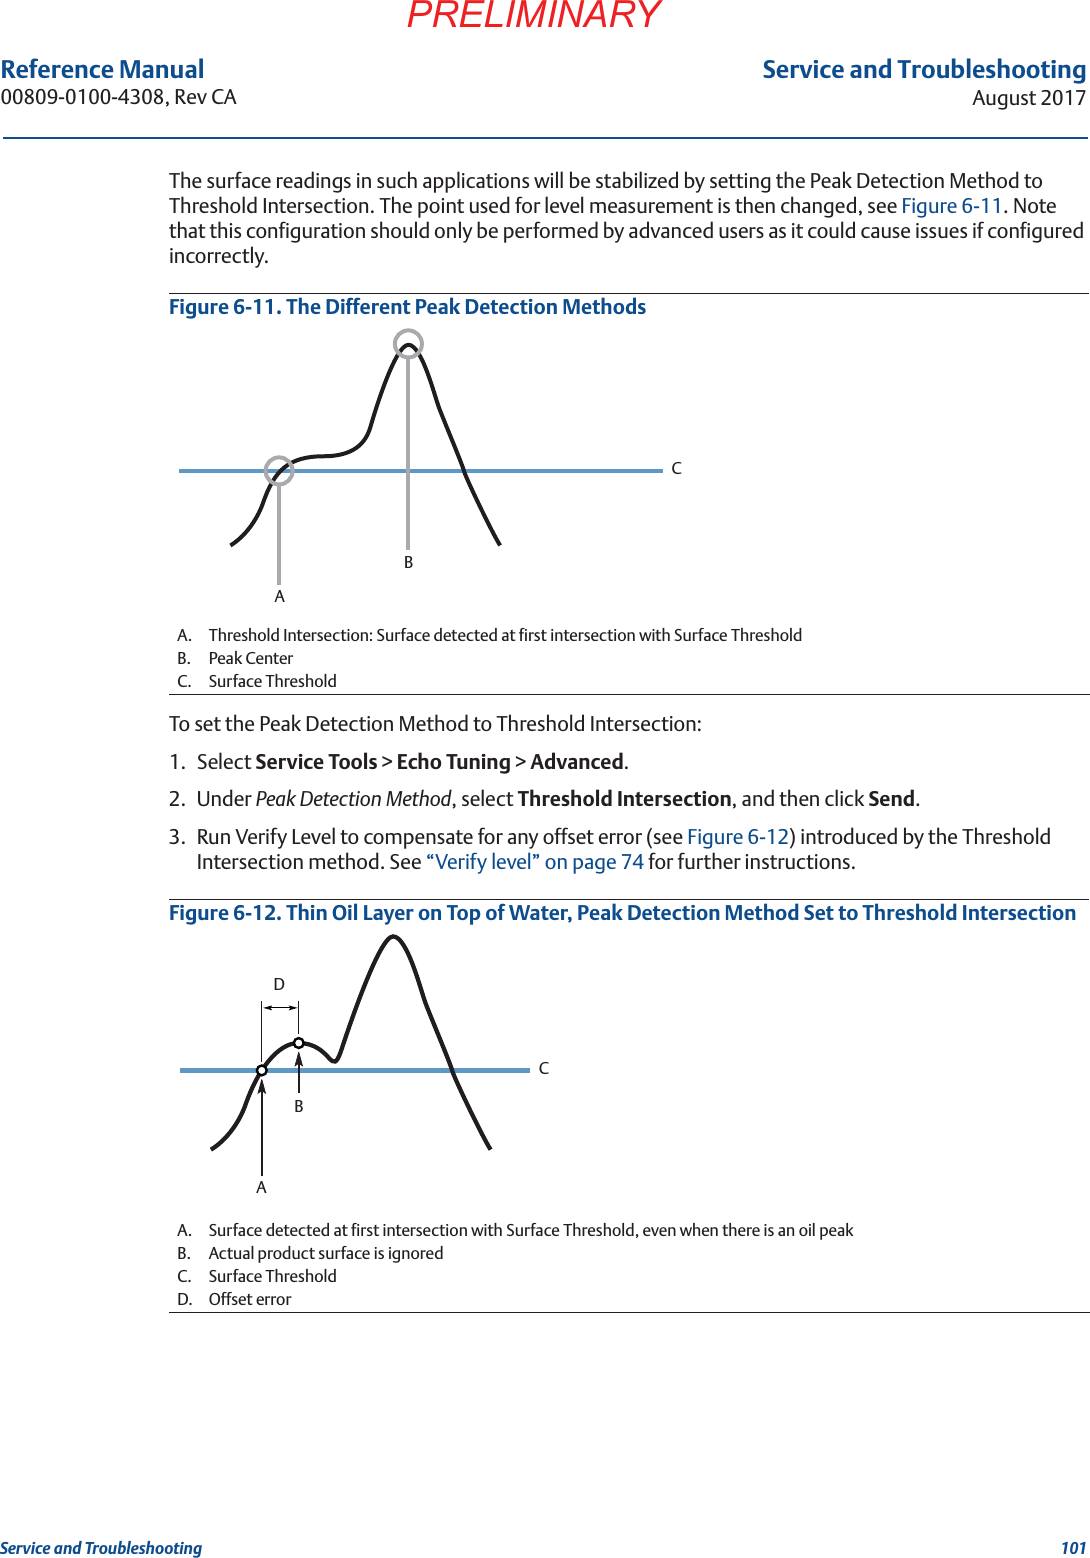 101Service and TroubleshootingAugust 2017Service and TroubleshootingPRELIMINARYReference Manual 00809-0100-4308, Rev CAThe surface readings in such applications will be stabilized by setting the Peak Detection Method to Threshold Intersection. The point used for level measurement is then changed, see Figure 6-11. Note that this configuration should only be performed by advanced users as it could cause issues if configured incorrectly.Figure 6-11. The Different Peak Detection MethodsTo set the Peak Detection Method to Threshold Intersection:1. Select Service Tools &gt; Echo Tuning &gt; Advanced.2. Under Peak Detection Method, select Threshold Intersection, and then click Send.3. Run Verify Level to compensate for any offset error (see Figure 6-12) introduced by the Threshold Intersection method. See “Verify level” on page 74 for further instructions.Figure 6-12. Thin Oil Layer on Top of Water, Peak Detection Method Set to Threshold IntersectionA. Threshold Intersection: Surface detected at first intersection with Surface ThresholdB. Peak CenterC. Surface ThresholdA. Surface detected at first intersection with Surface Threshold, even when there is an oil peakB. Actual product surface is ignoredC. Surface ThresholdD. Offset errorABCACBD